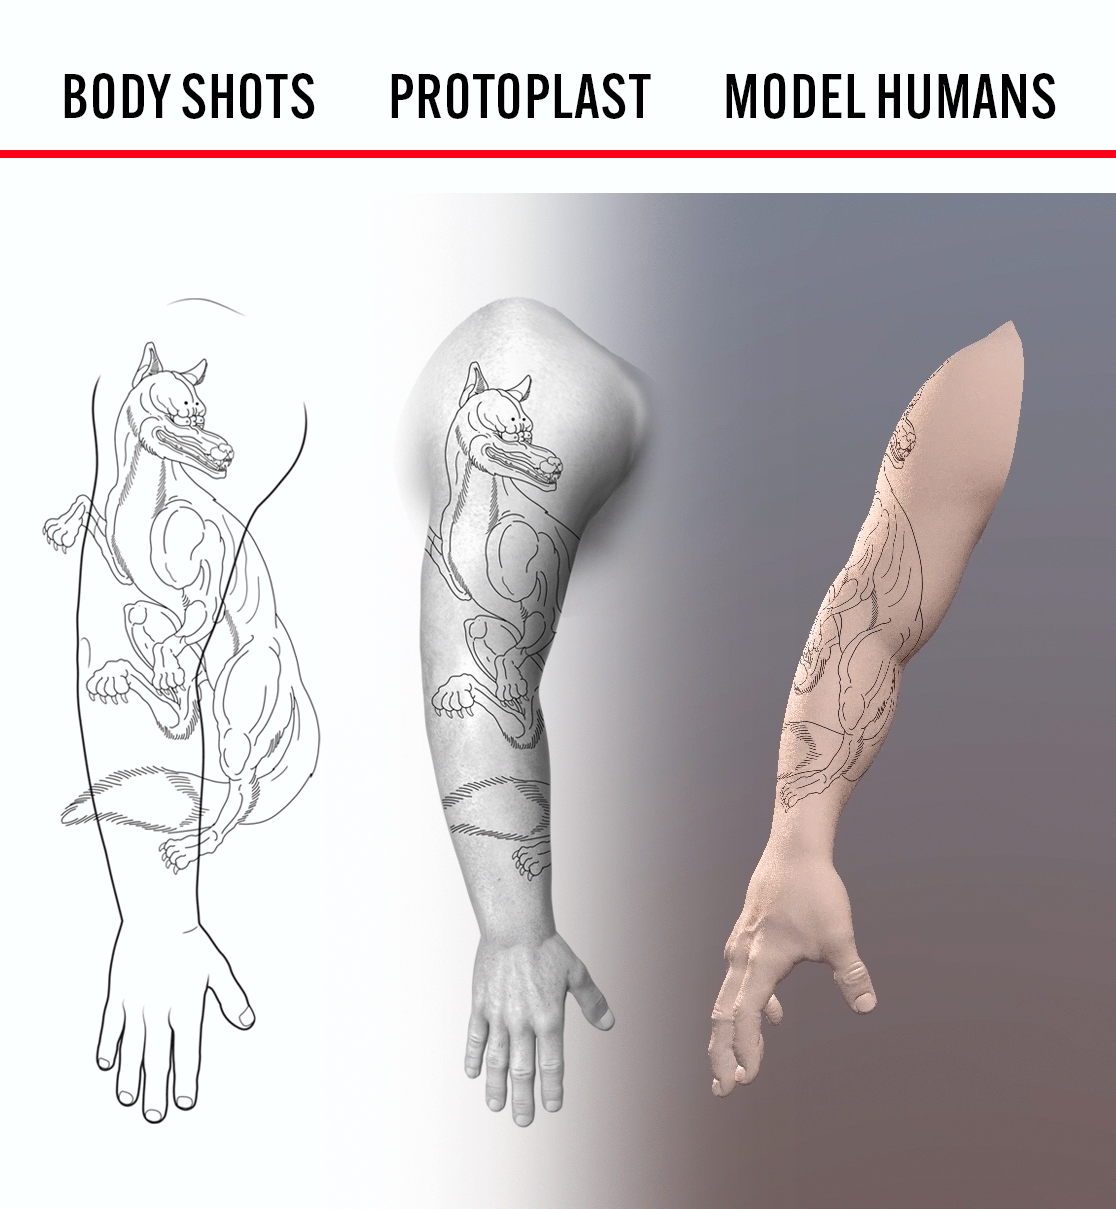 Human Canvases for Tattoo Mockups